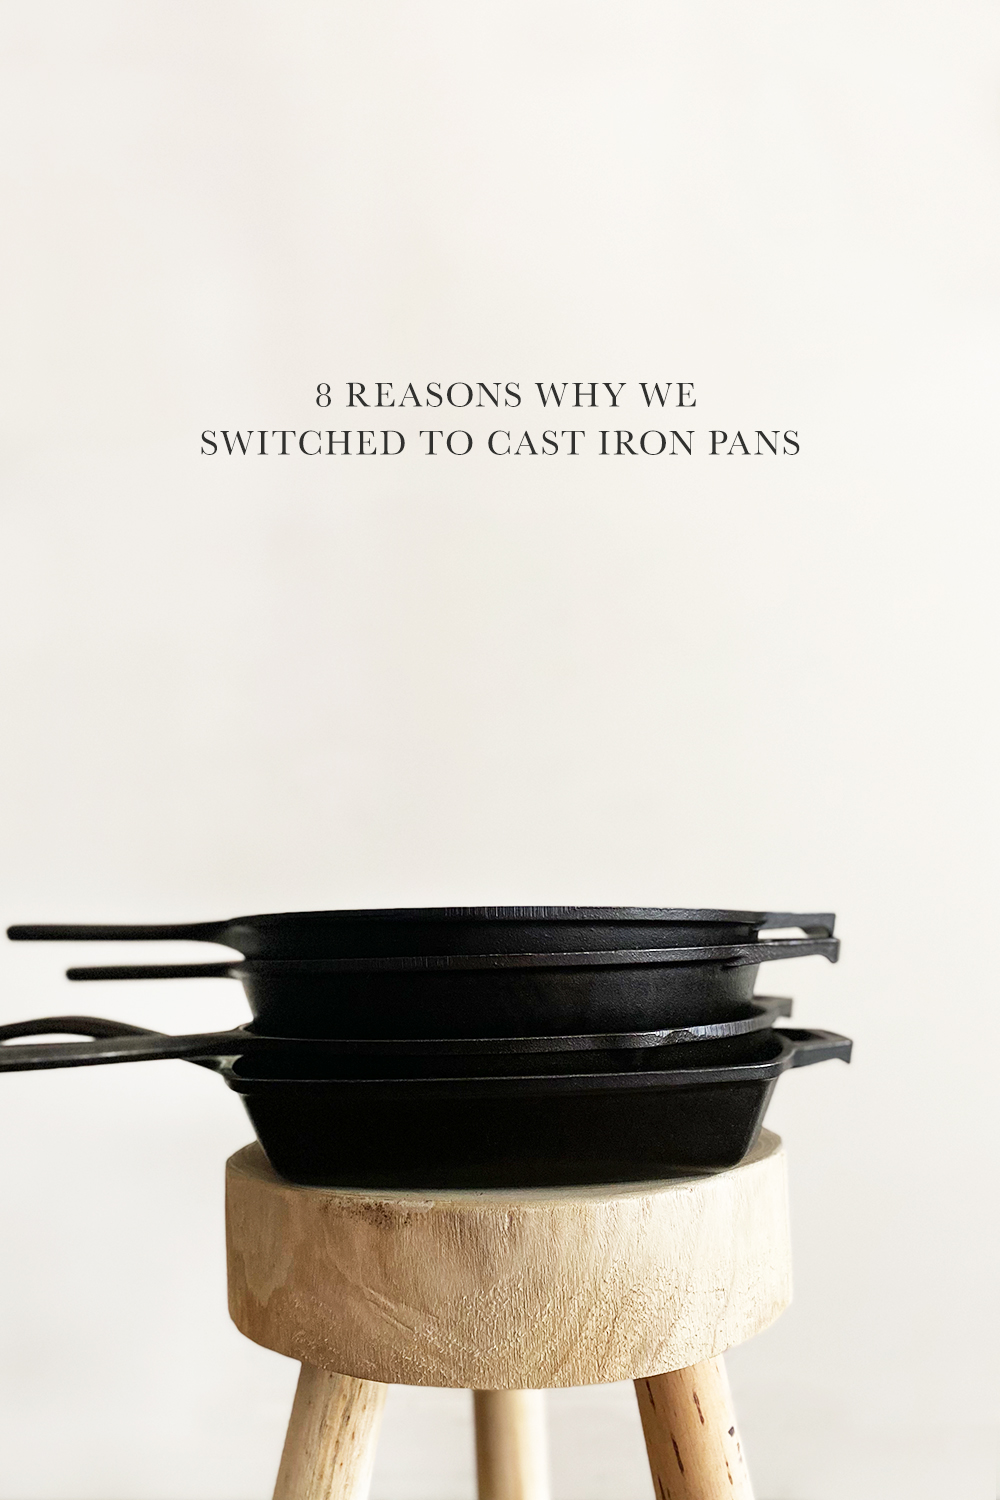 This was another baby step we made in the efforts to reducing our toxin load and creating a safer home. I shared 8 reasons why we switched to cast iron pans. Catch it over on KaraLayne.com!